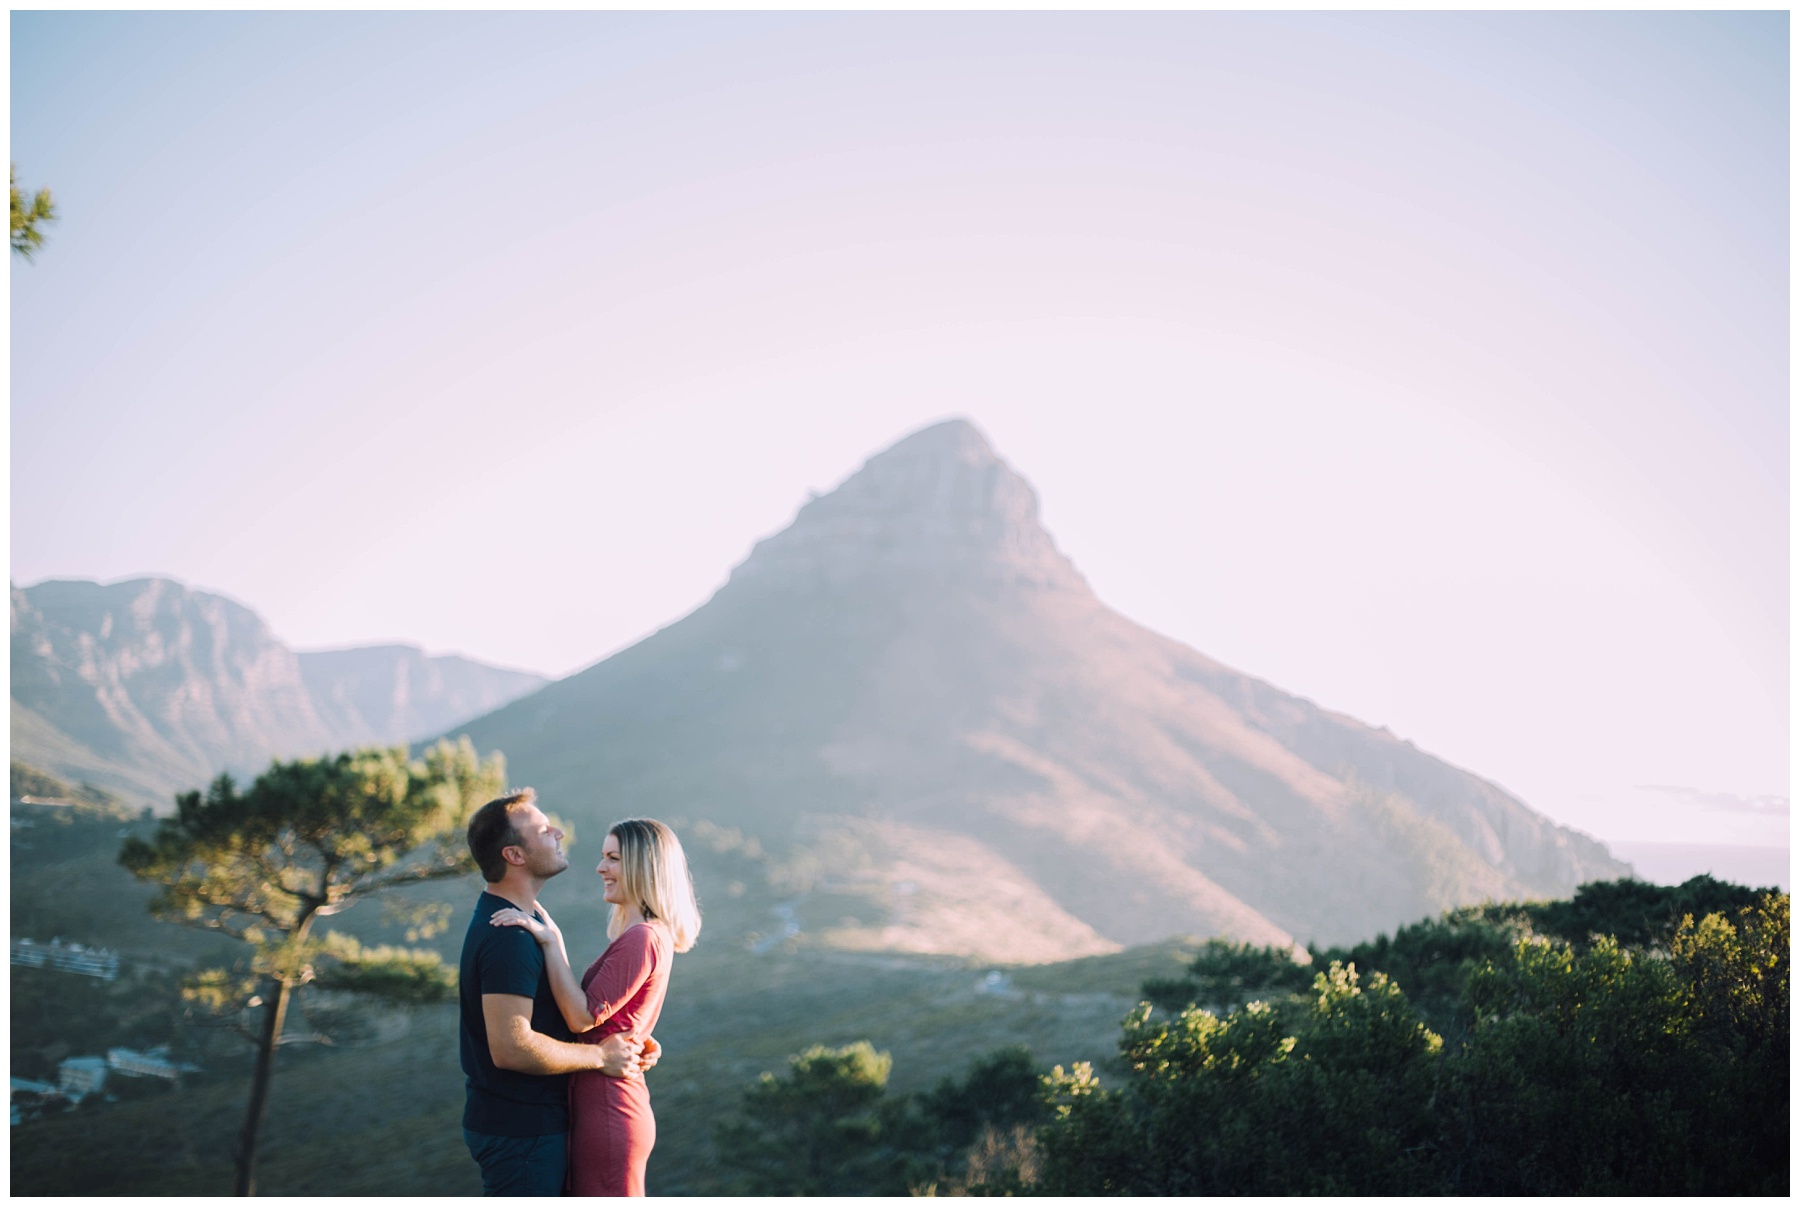 Ronel Kruger Cape Town Wedding and Lifestyle Photographer_2116.jpg